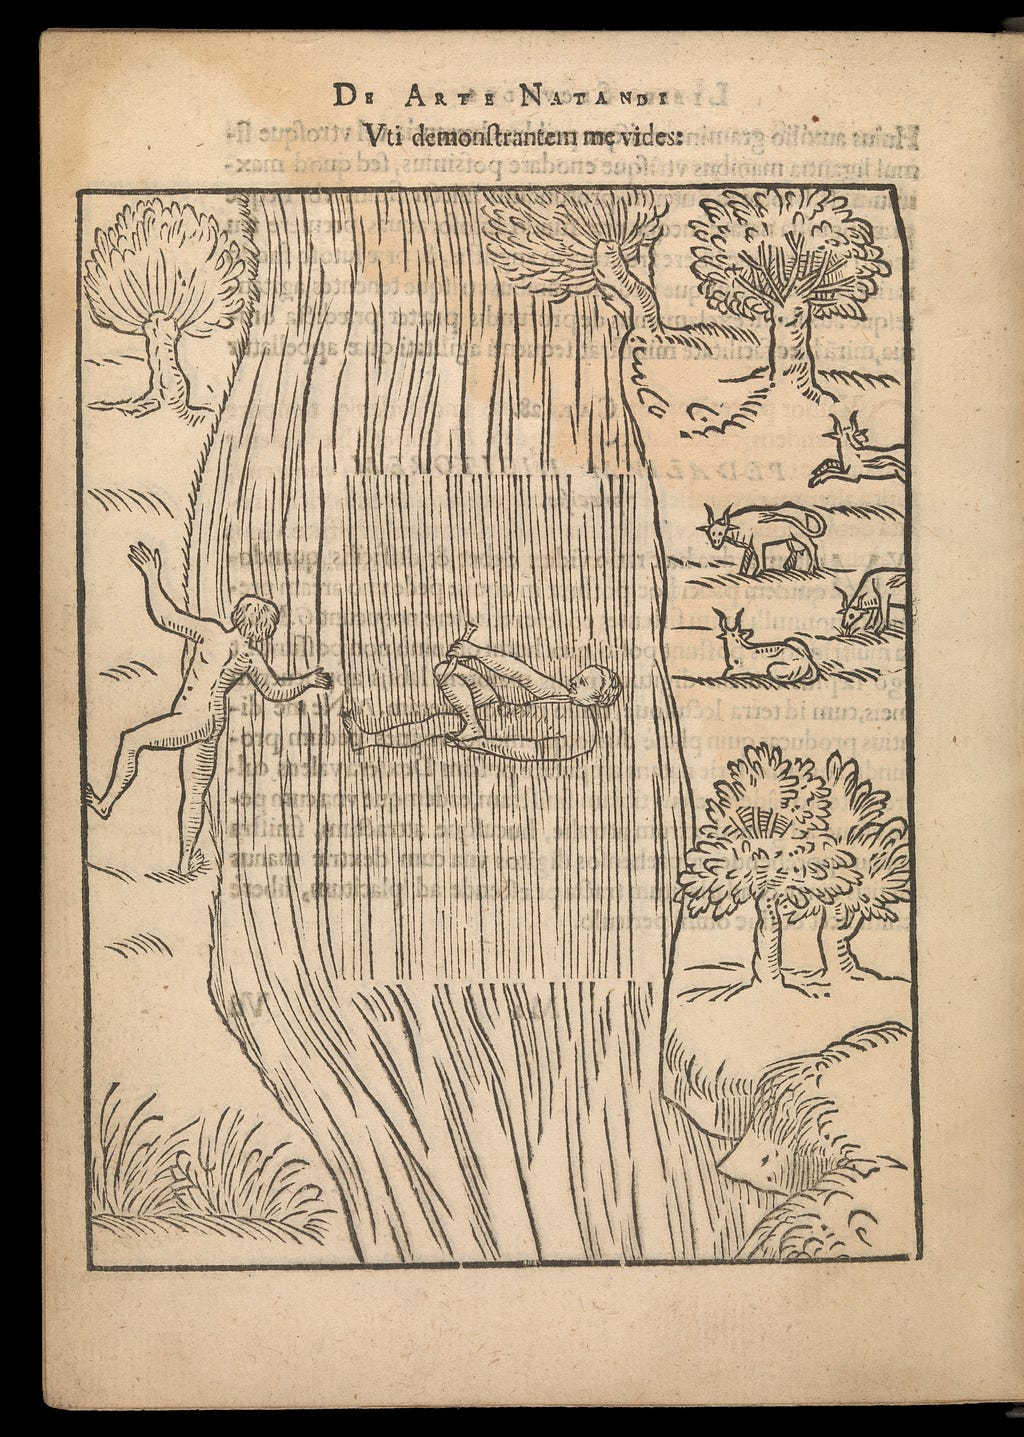 Woodcut showing a nude man falling into the river while another nude man floats.